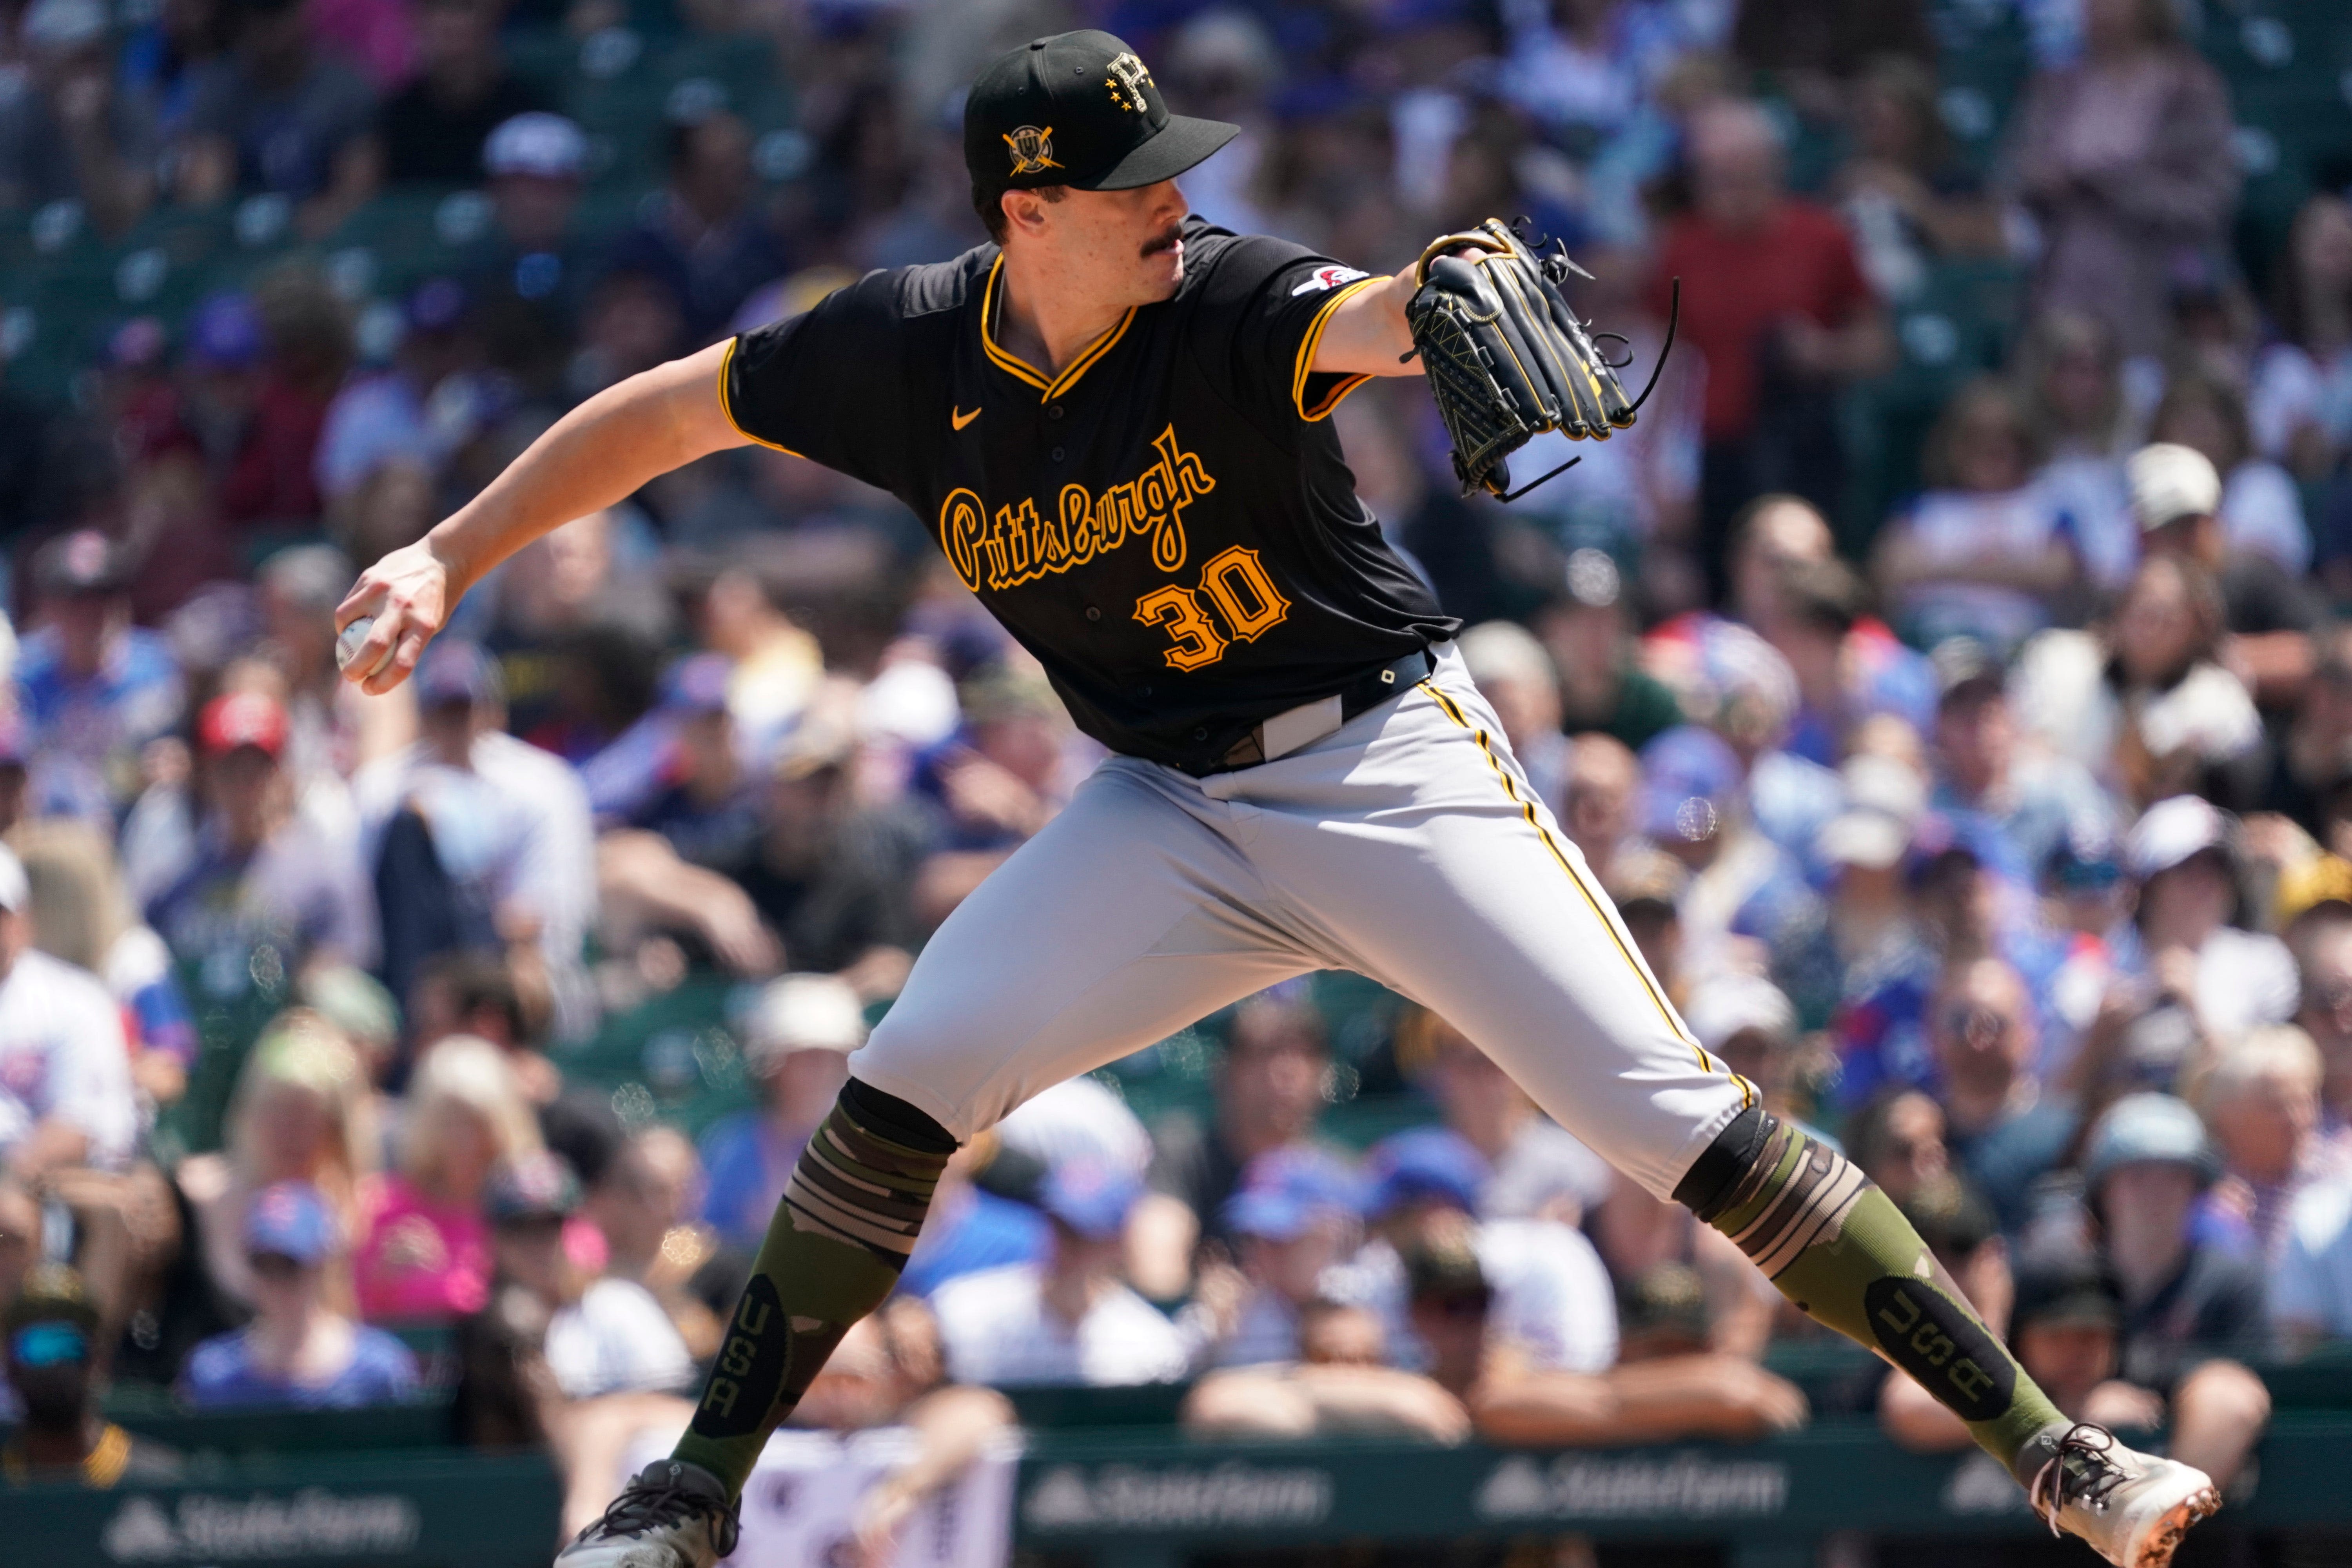 Pittsburgh Pirates' Paul Skenes has social media marveling after game vs Chicago Cubs